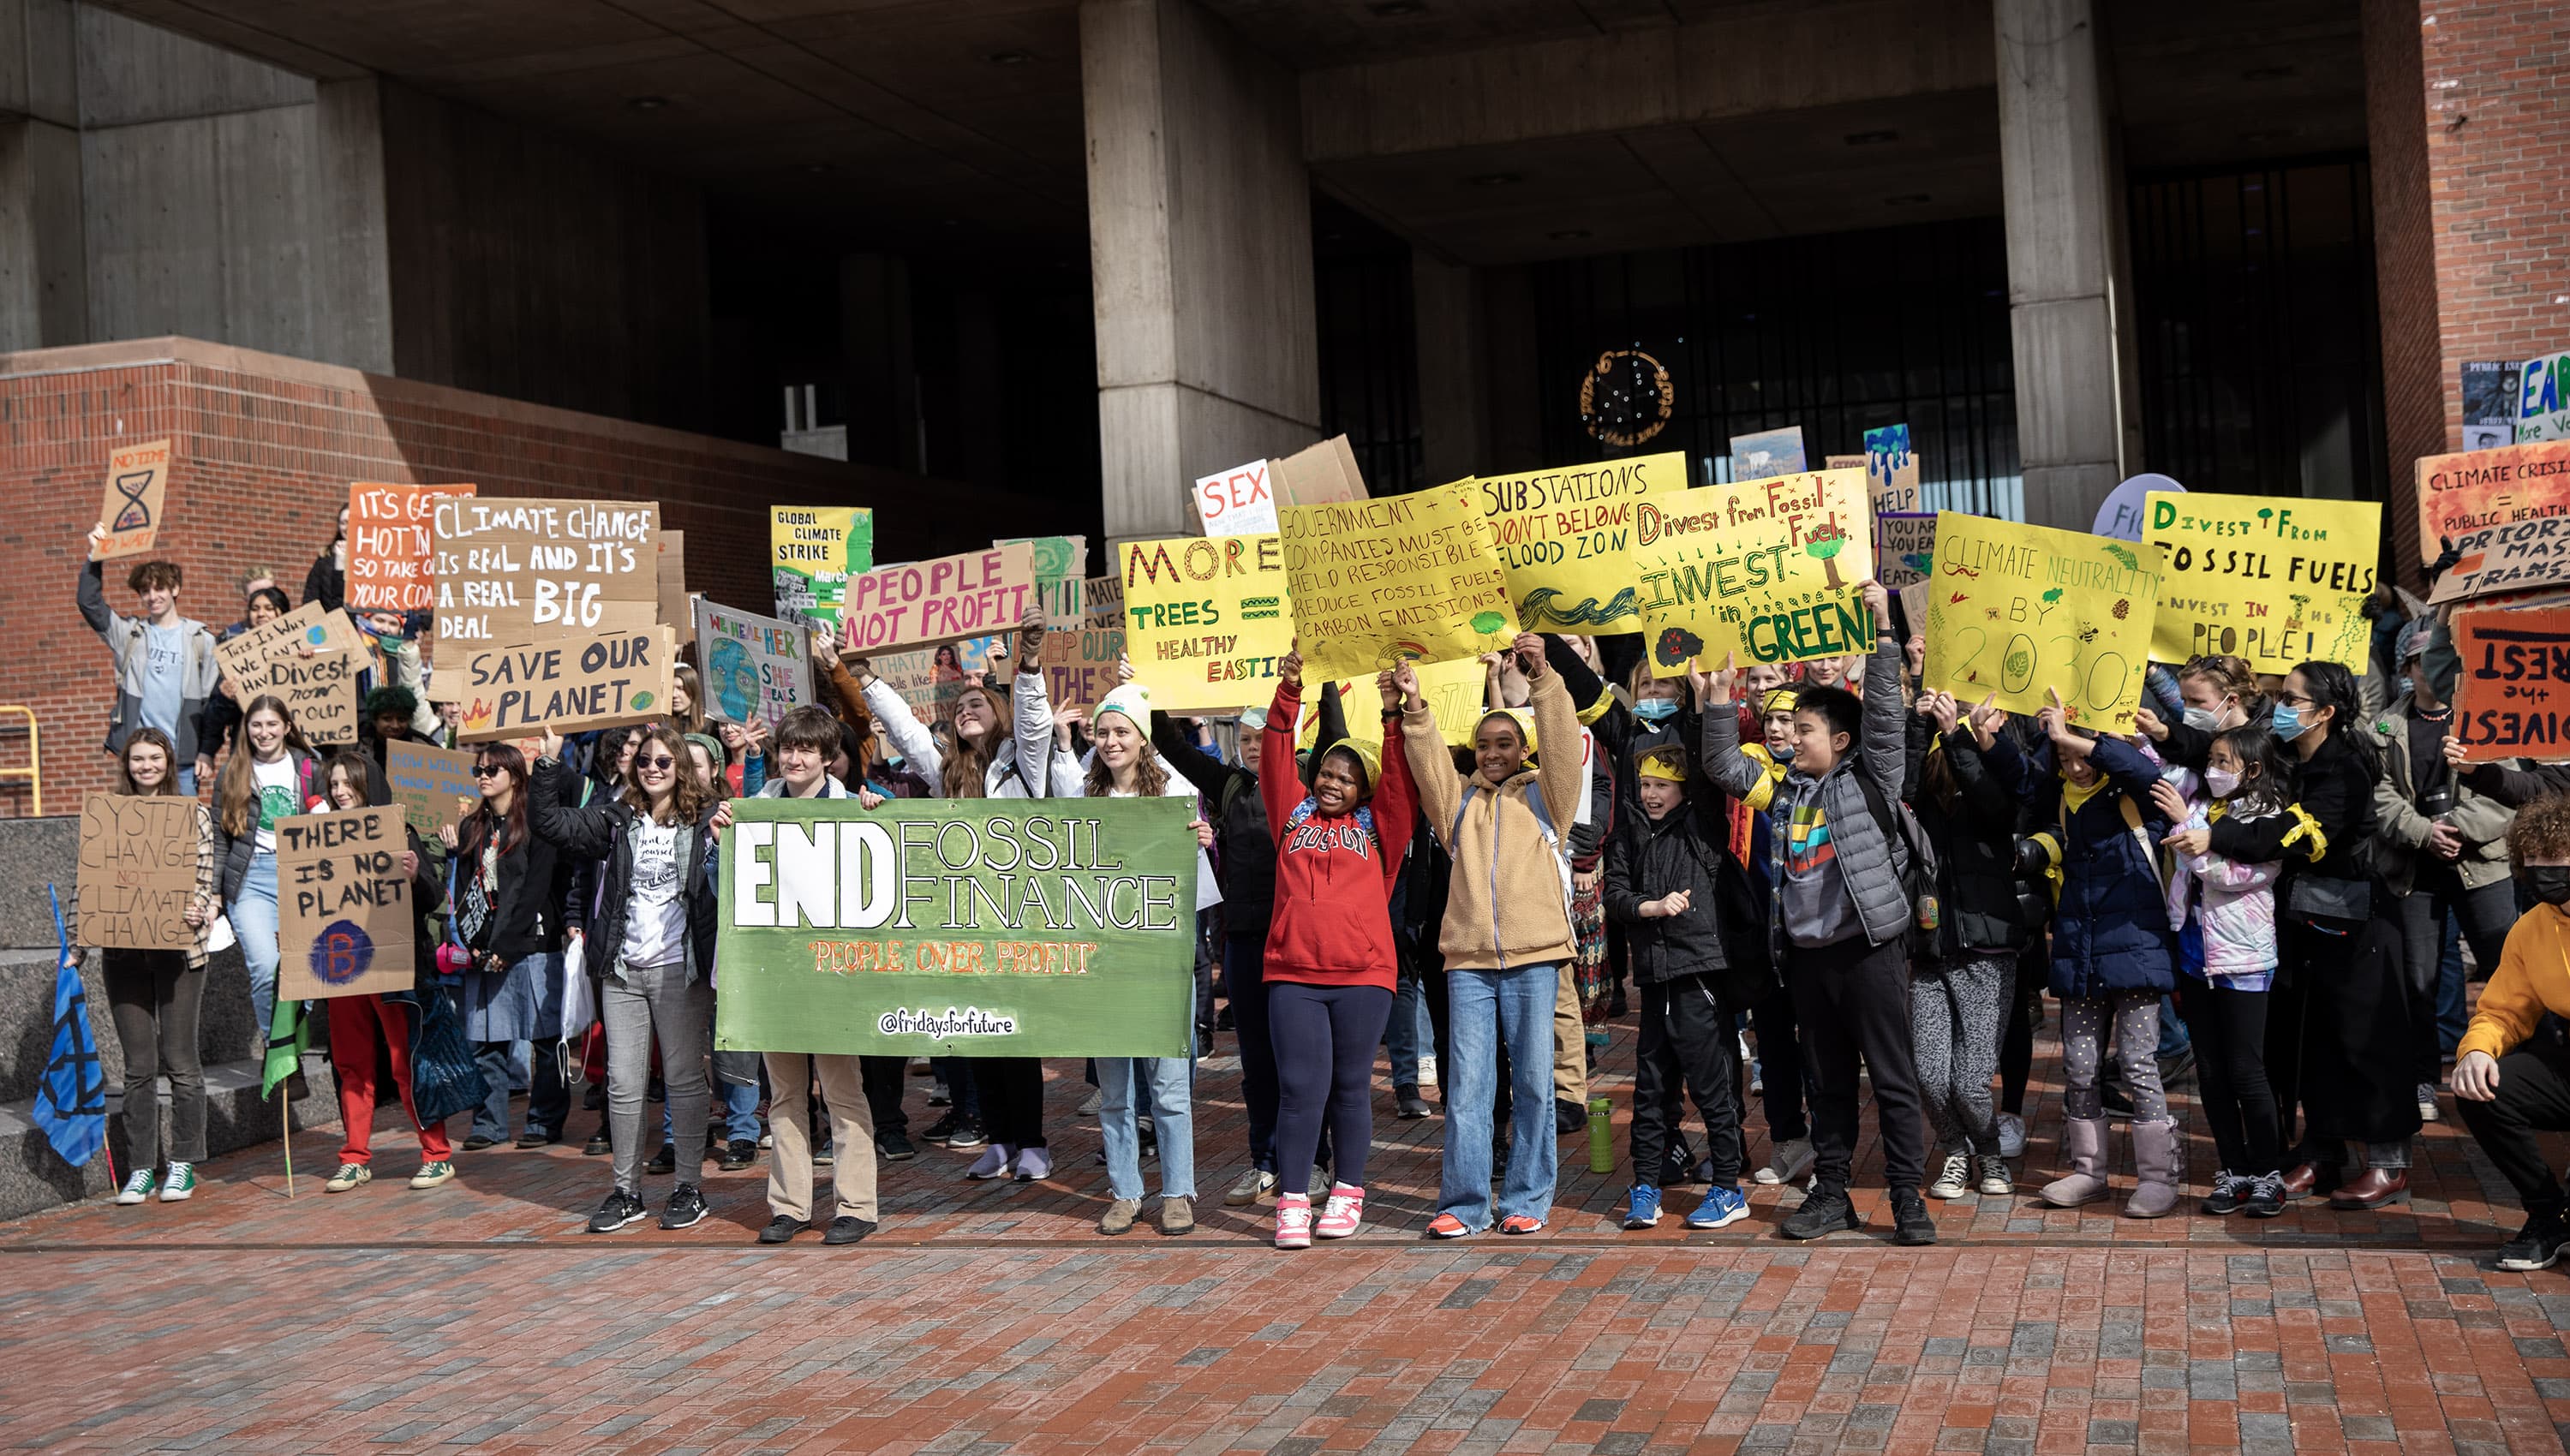 Fridays For Future protesters demanding a halt to all investment in fossil fuels, hold up their banners in front of Boston City Hall. (Credit: Robin Lubbock/WBUR)